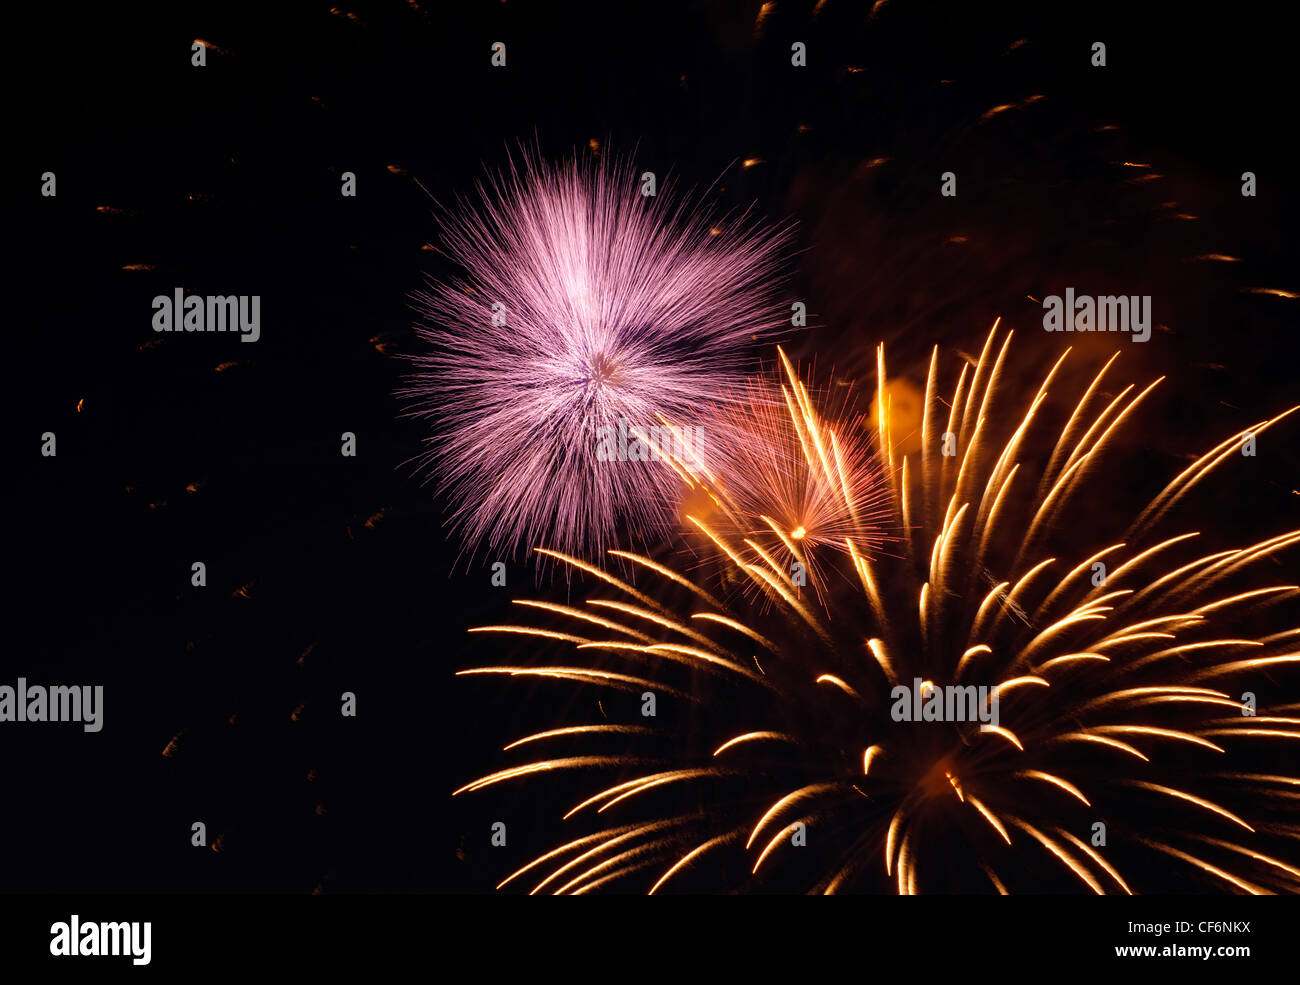 Pyrotechnic show. Bright fireworks explosions in the night sky. Stock Photo